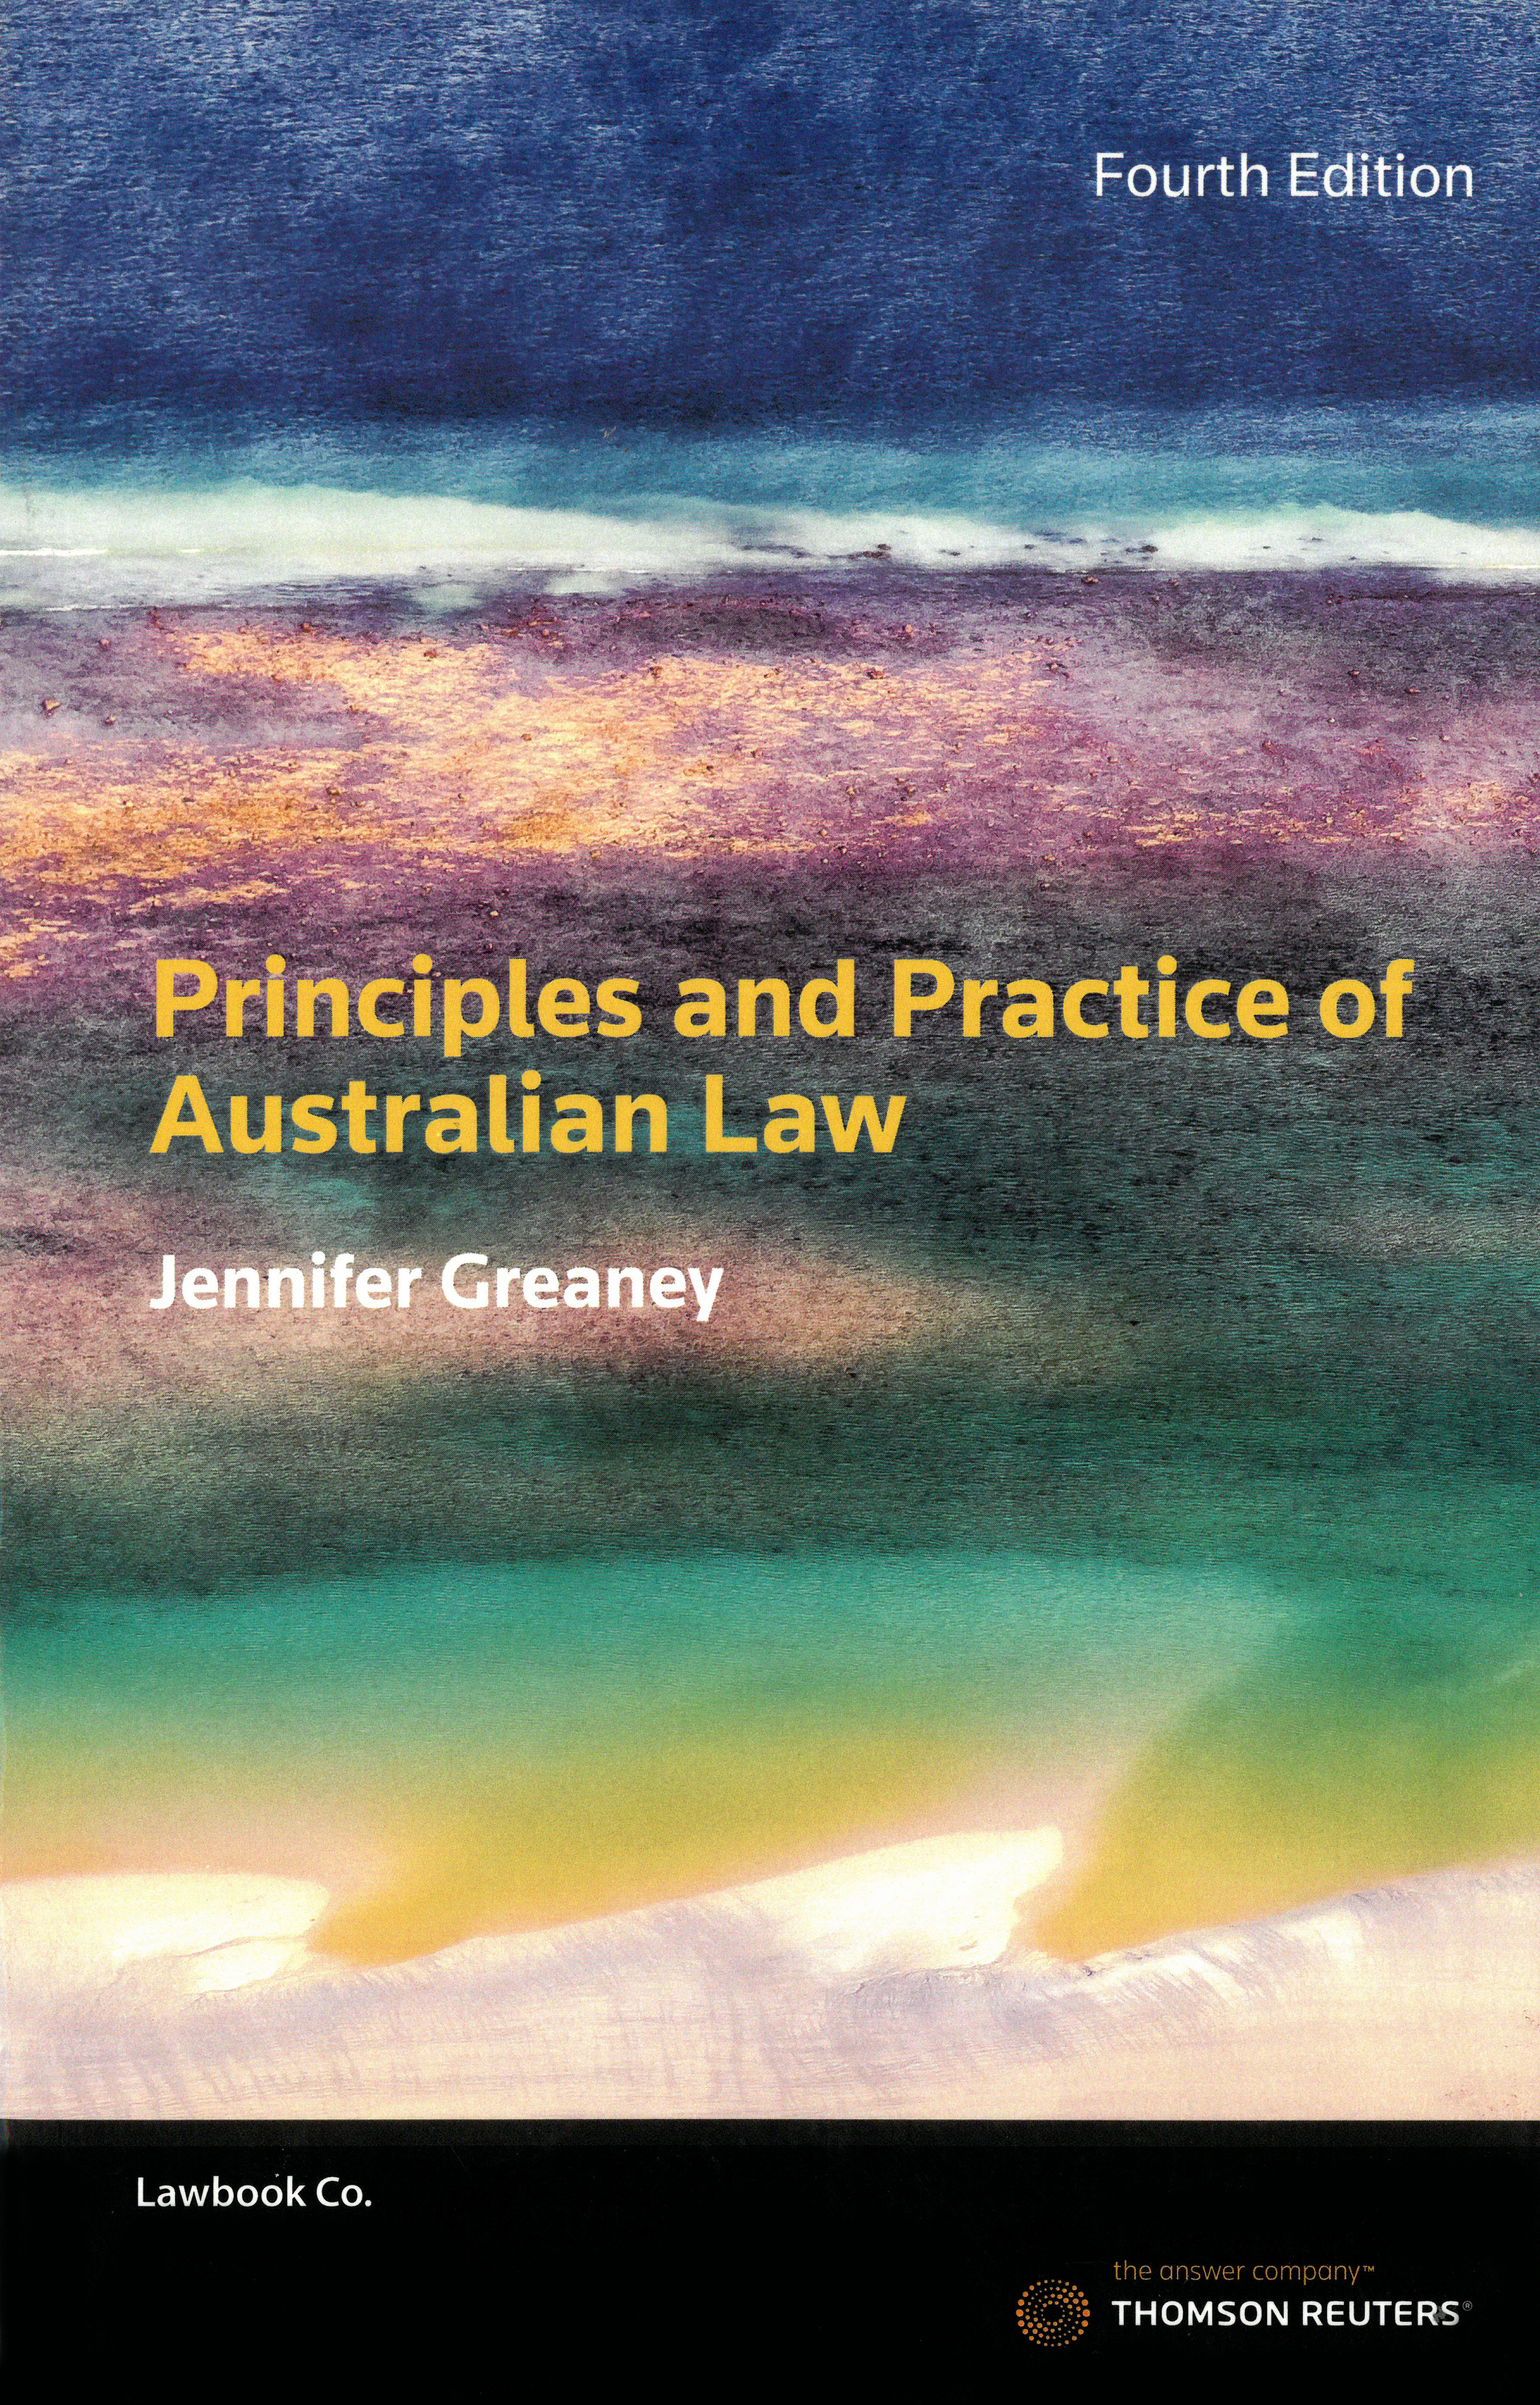 Principles and Practice of Australian Law e4